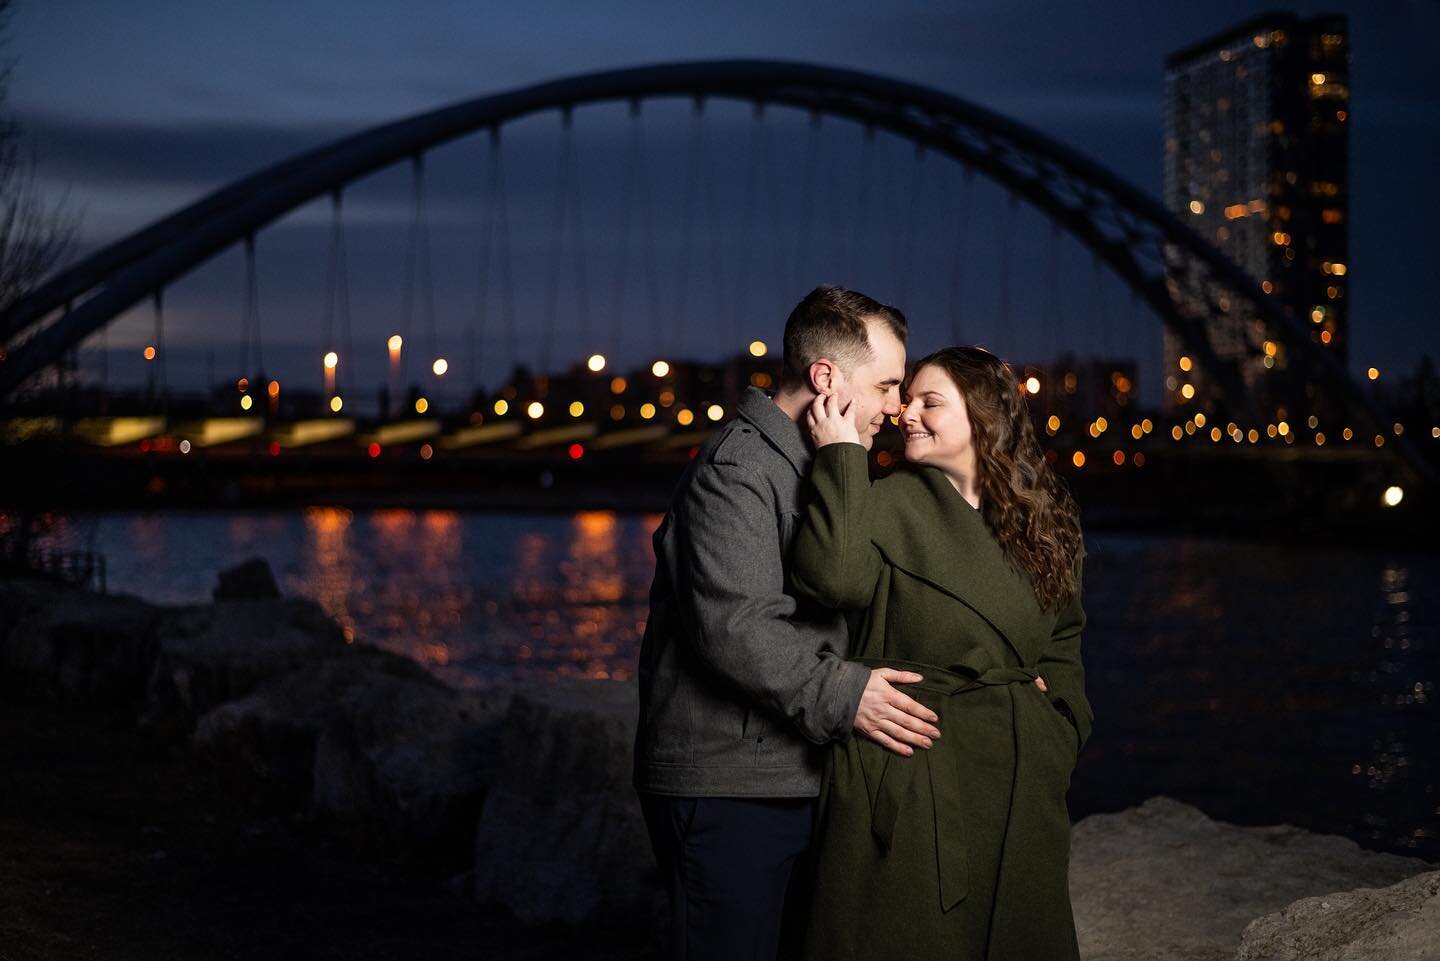 Took Brittany and Zach out to the Humber Bay Bridge on this cold windy day for their engagement session. This location makes for a great backdrop if you&rsquo;re looking to incorporate an interesting architectural element into your photos. Also, this